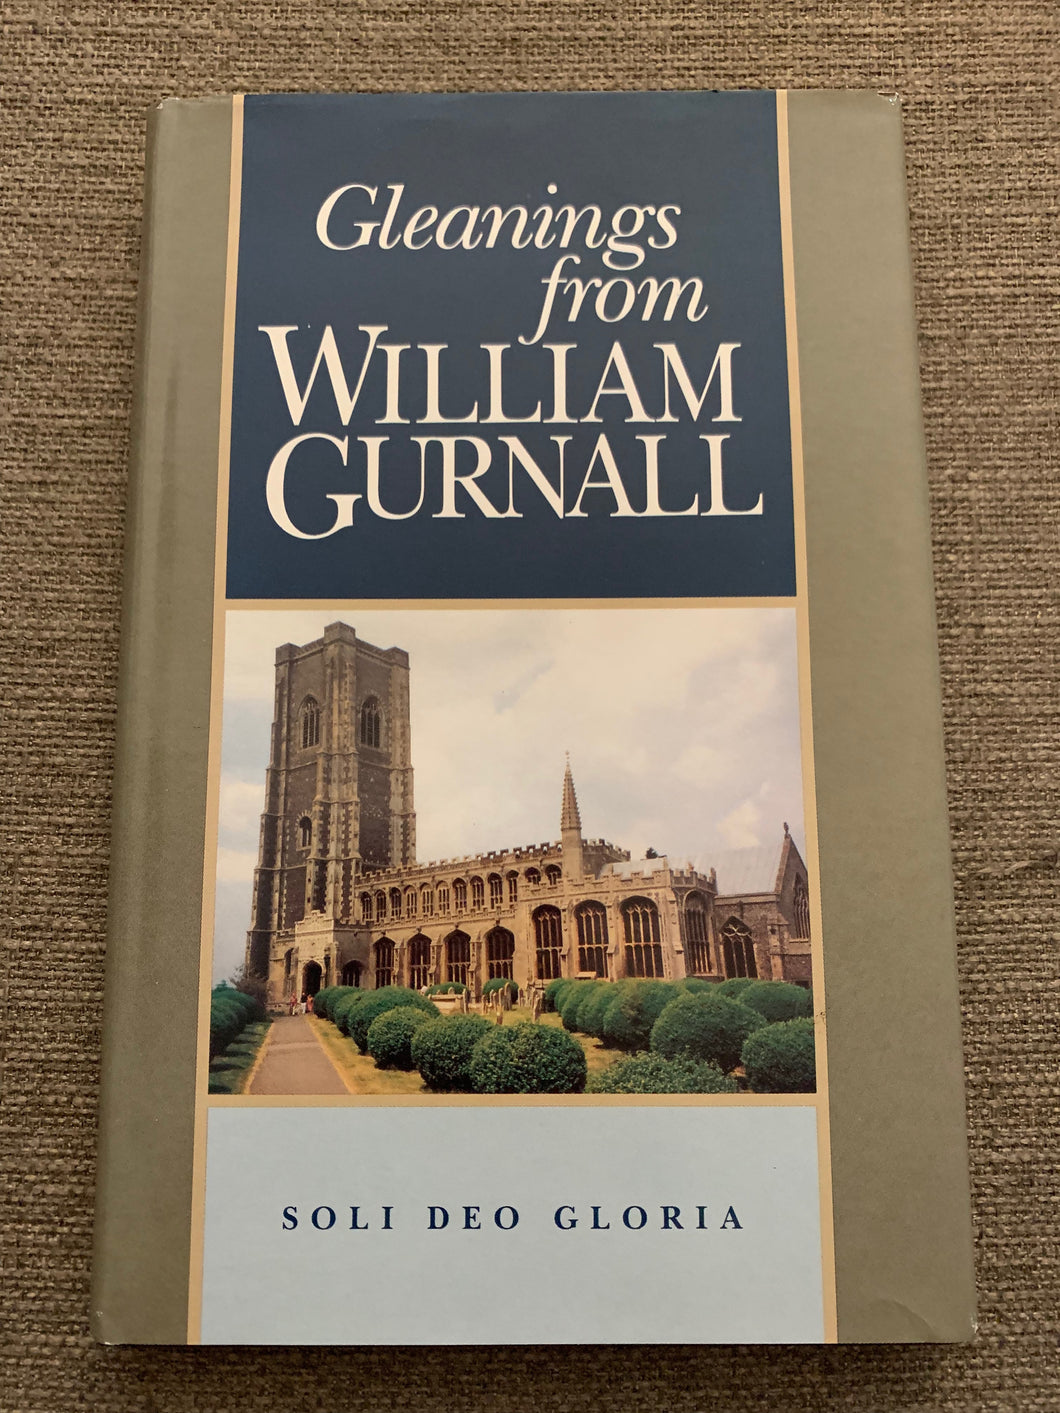 Gleanings from William Gurnall by Soli Deo Gloria